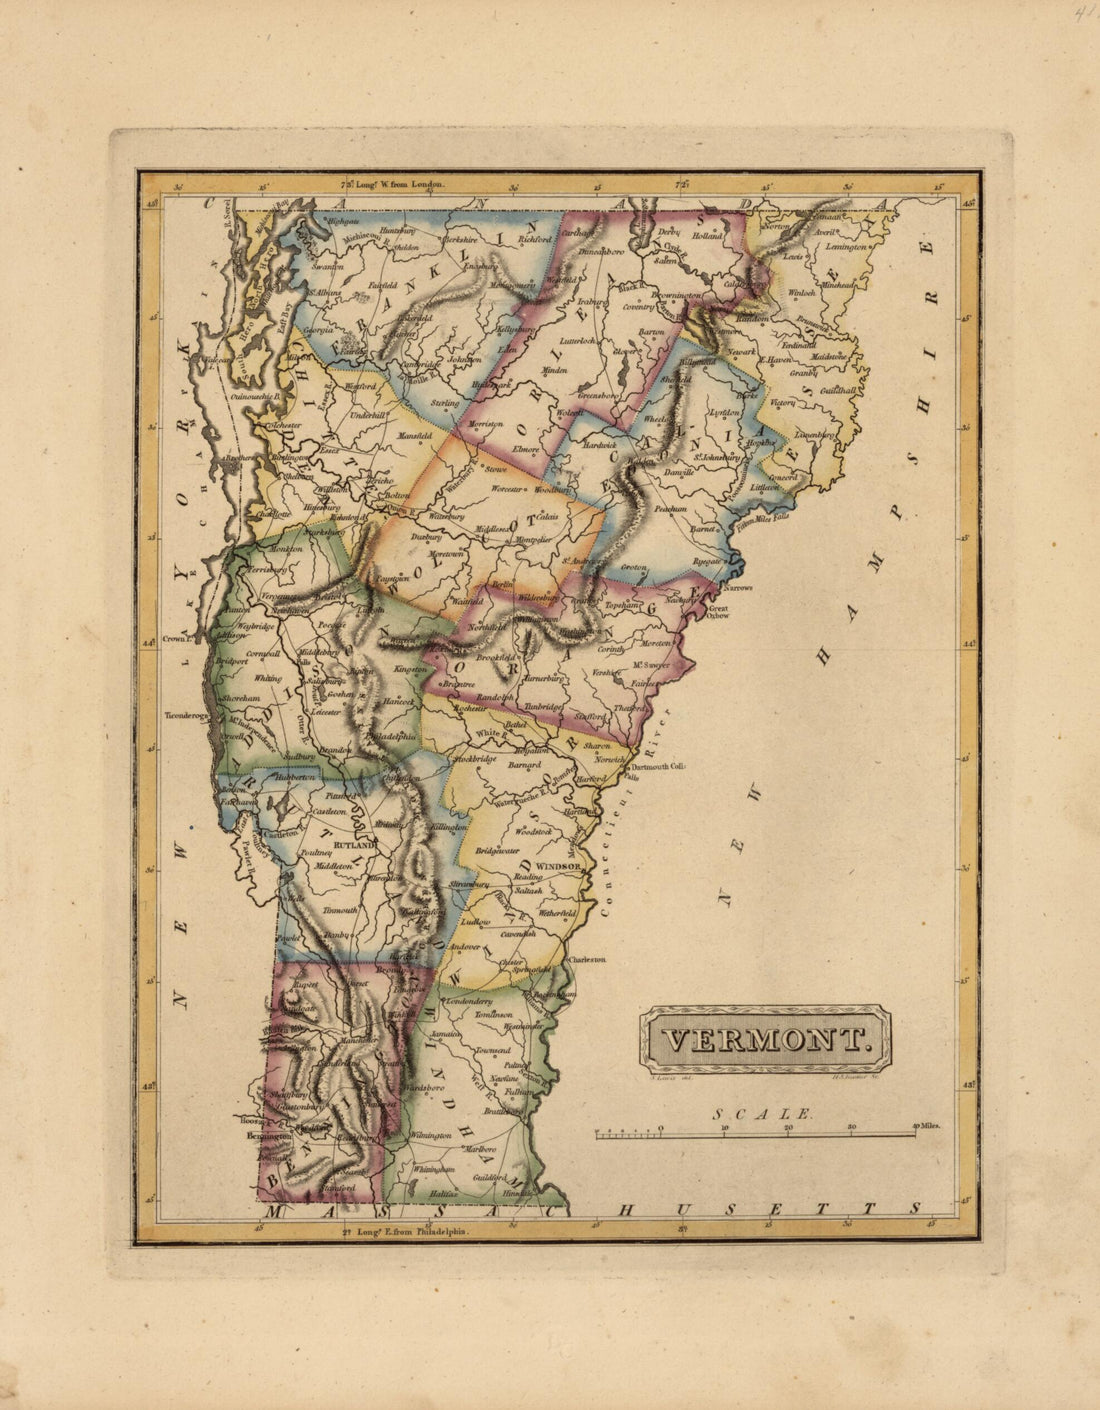 This old map of Vermont from a New and Elegant General Atlas, Containing Maps of Each of the United States  from 1817 was created by Henry Schenck Tanner in 1817